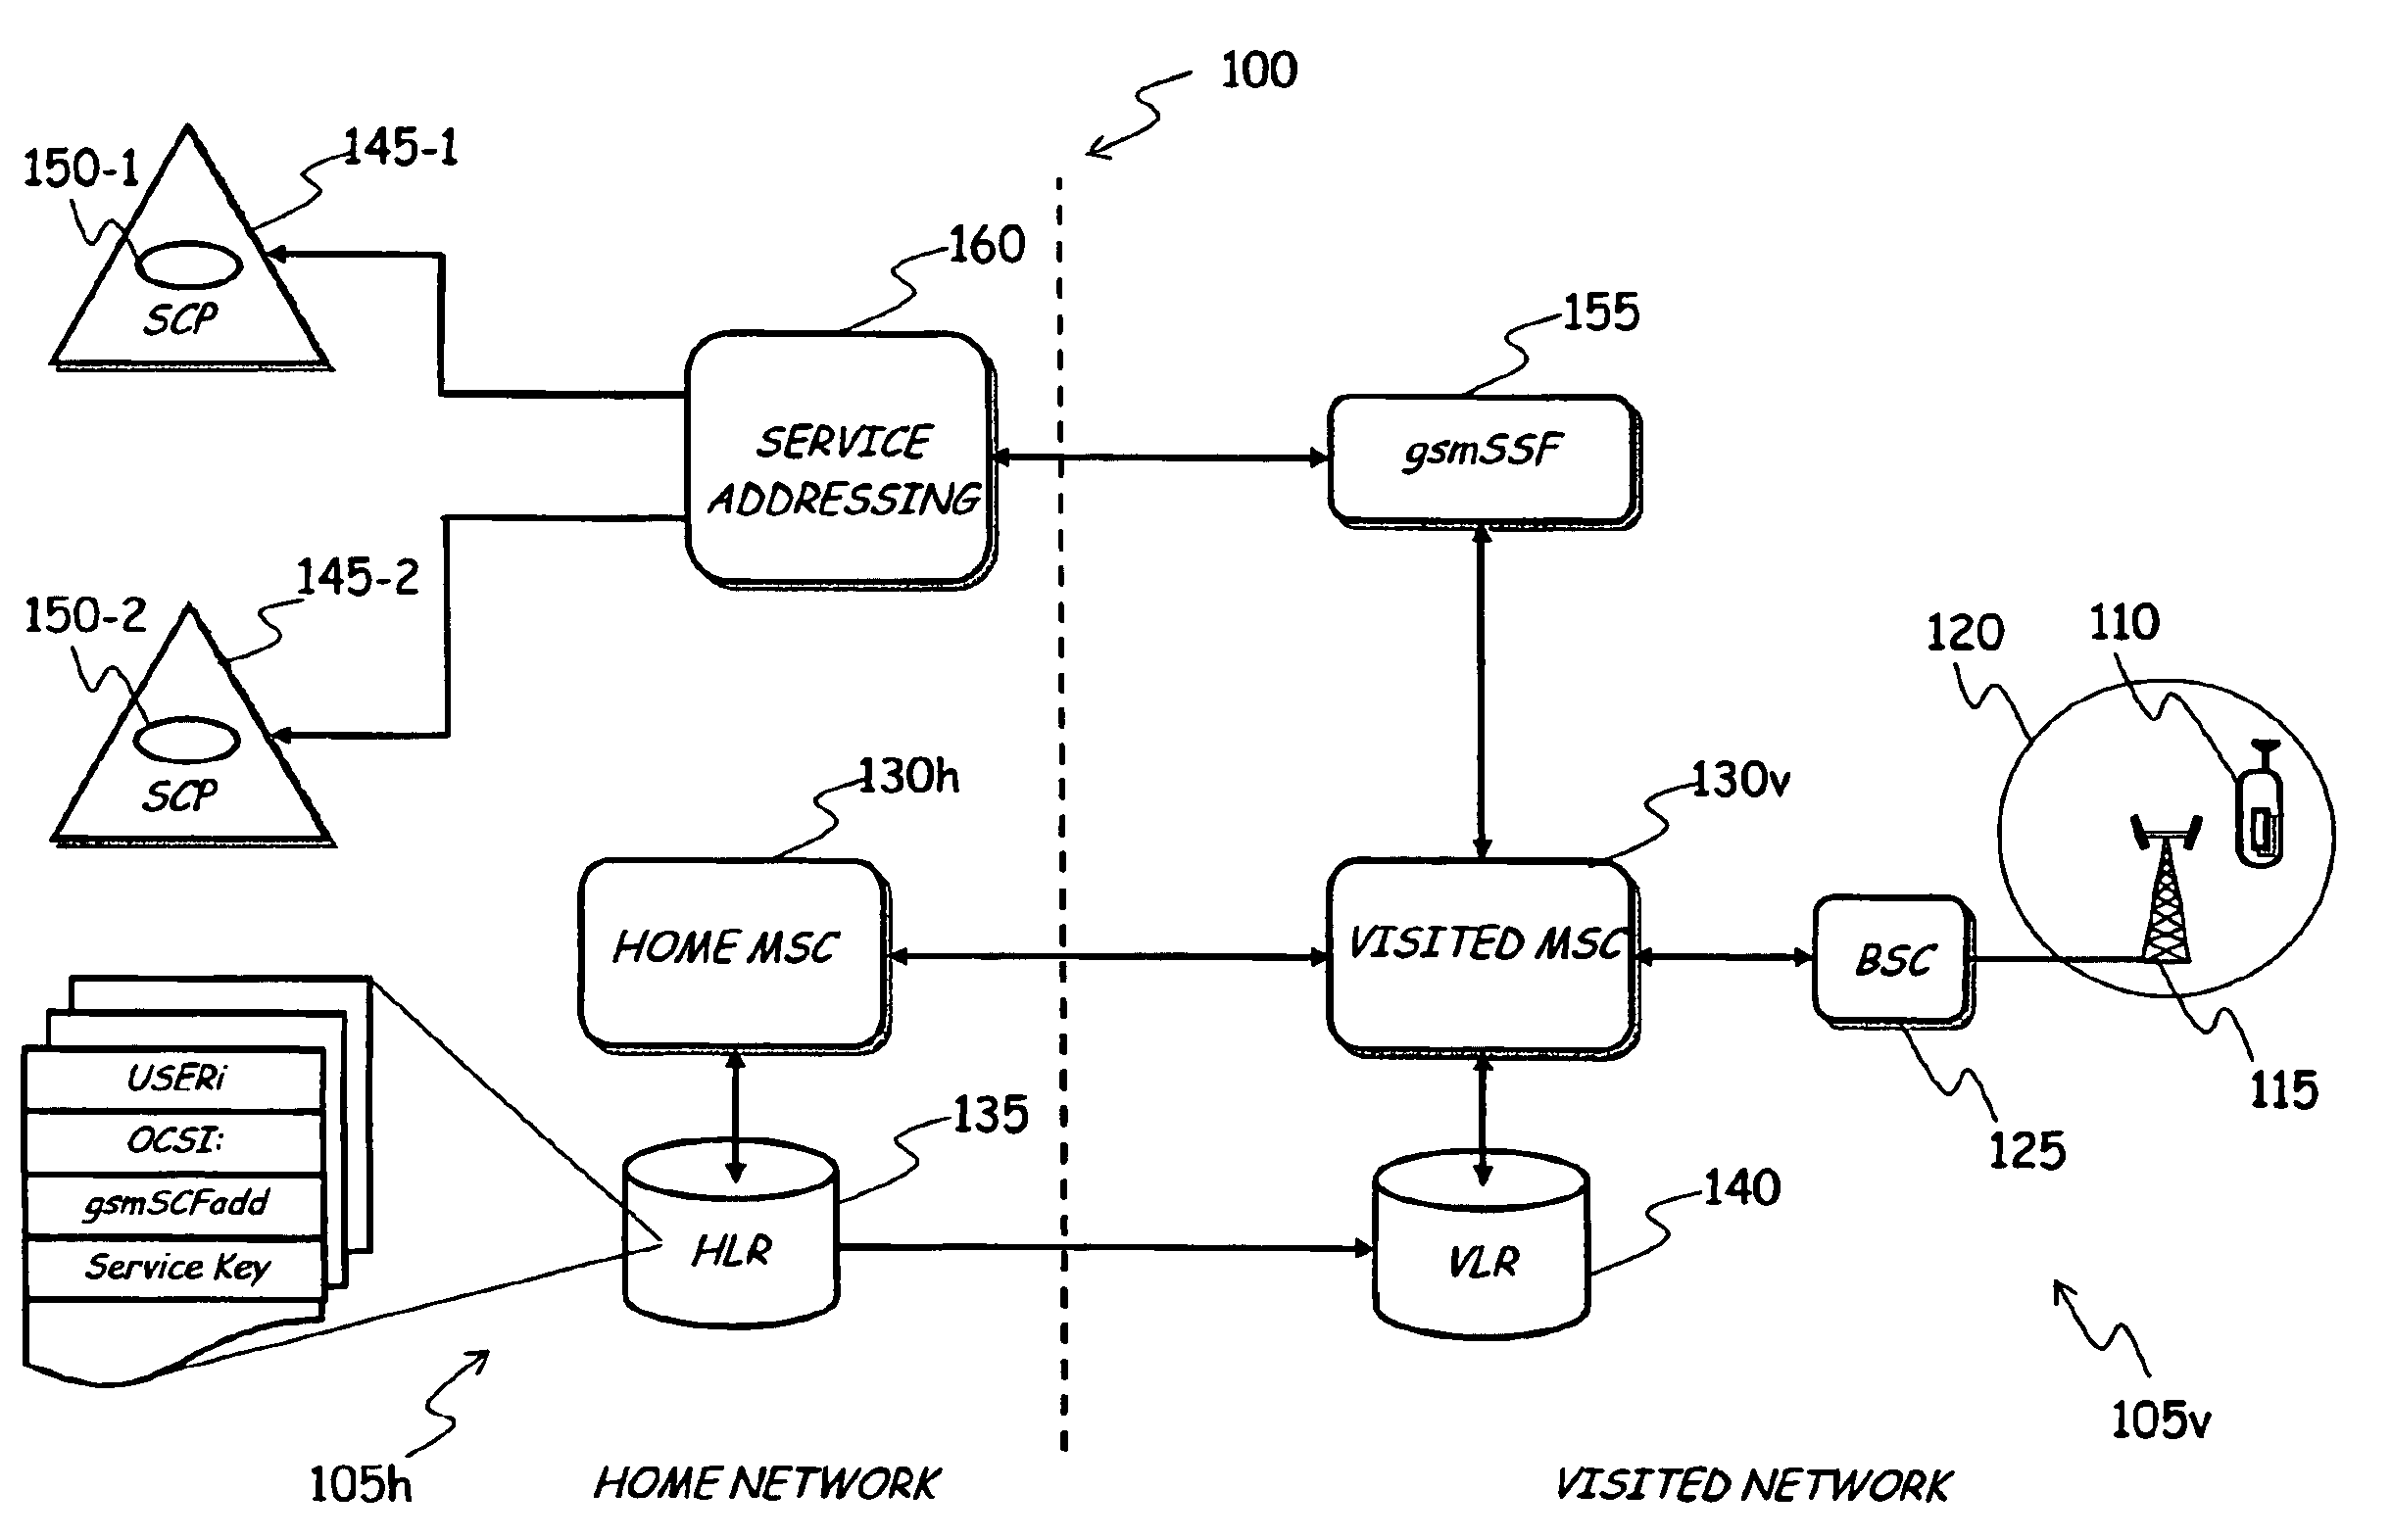 Method for allowing access to services offered by an intelligent mobile communications network